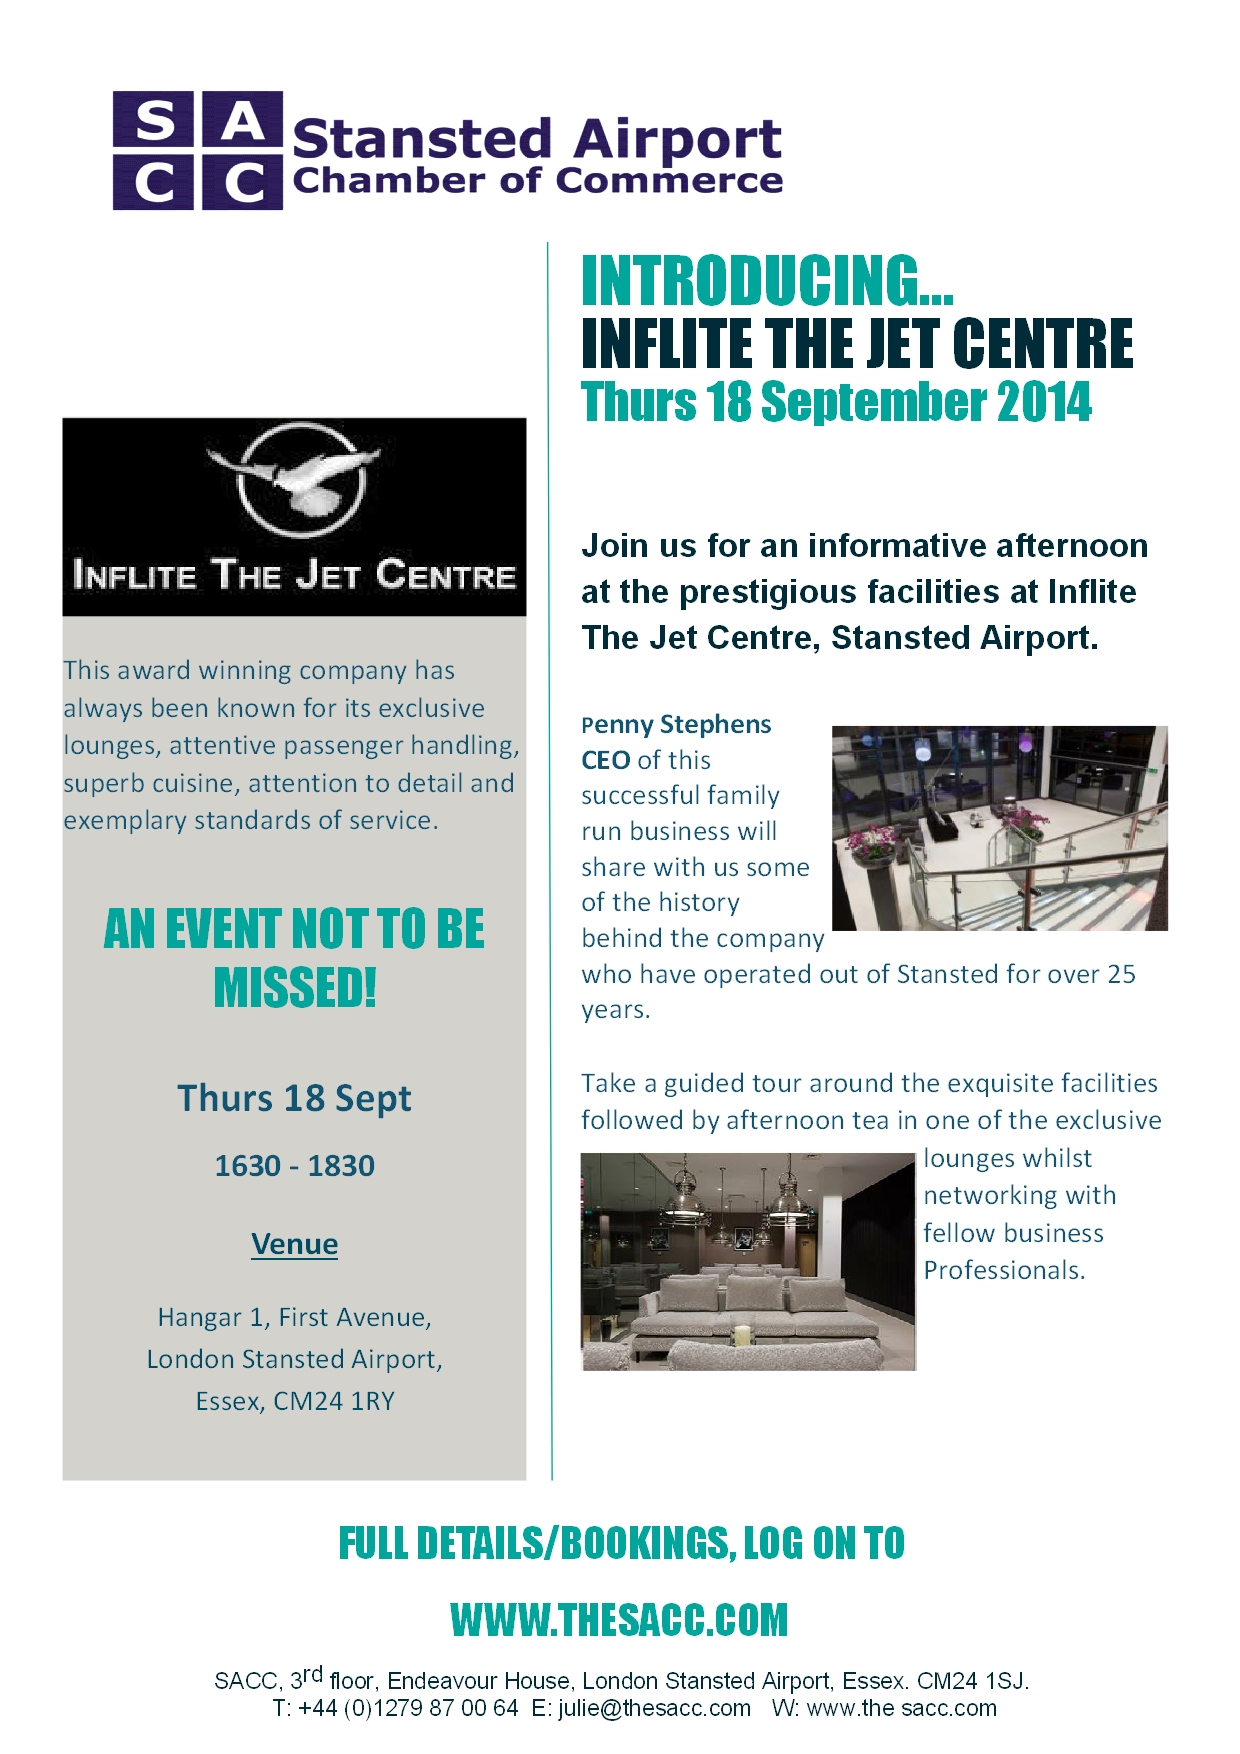 Inflite The Jet Centre